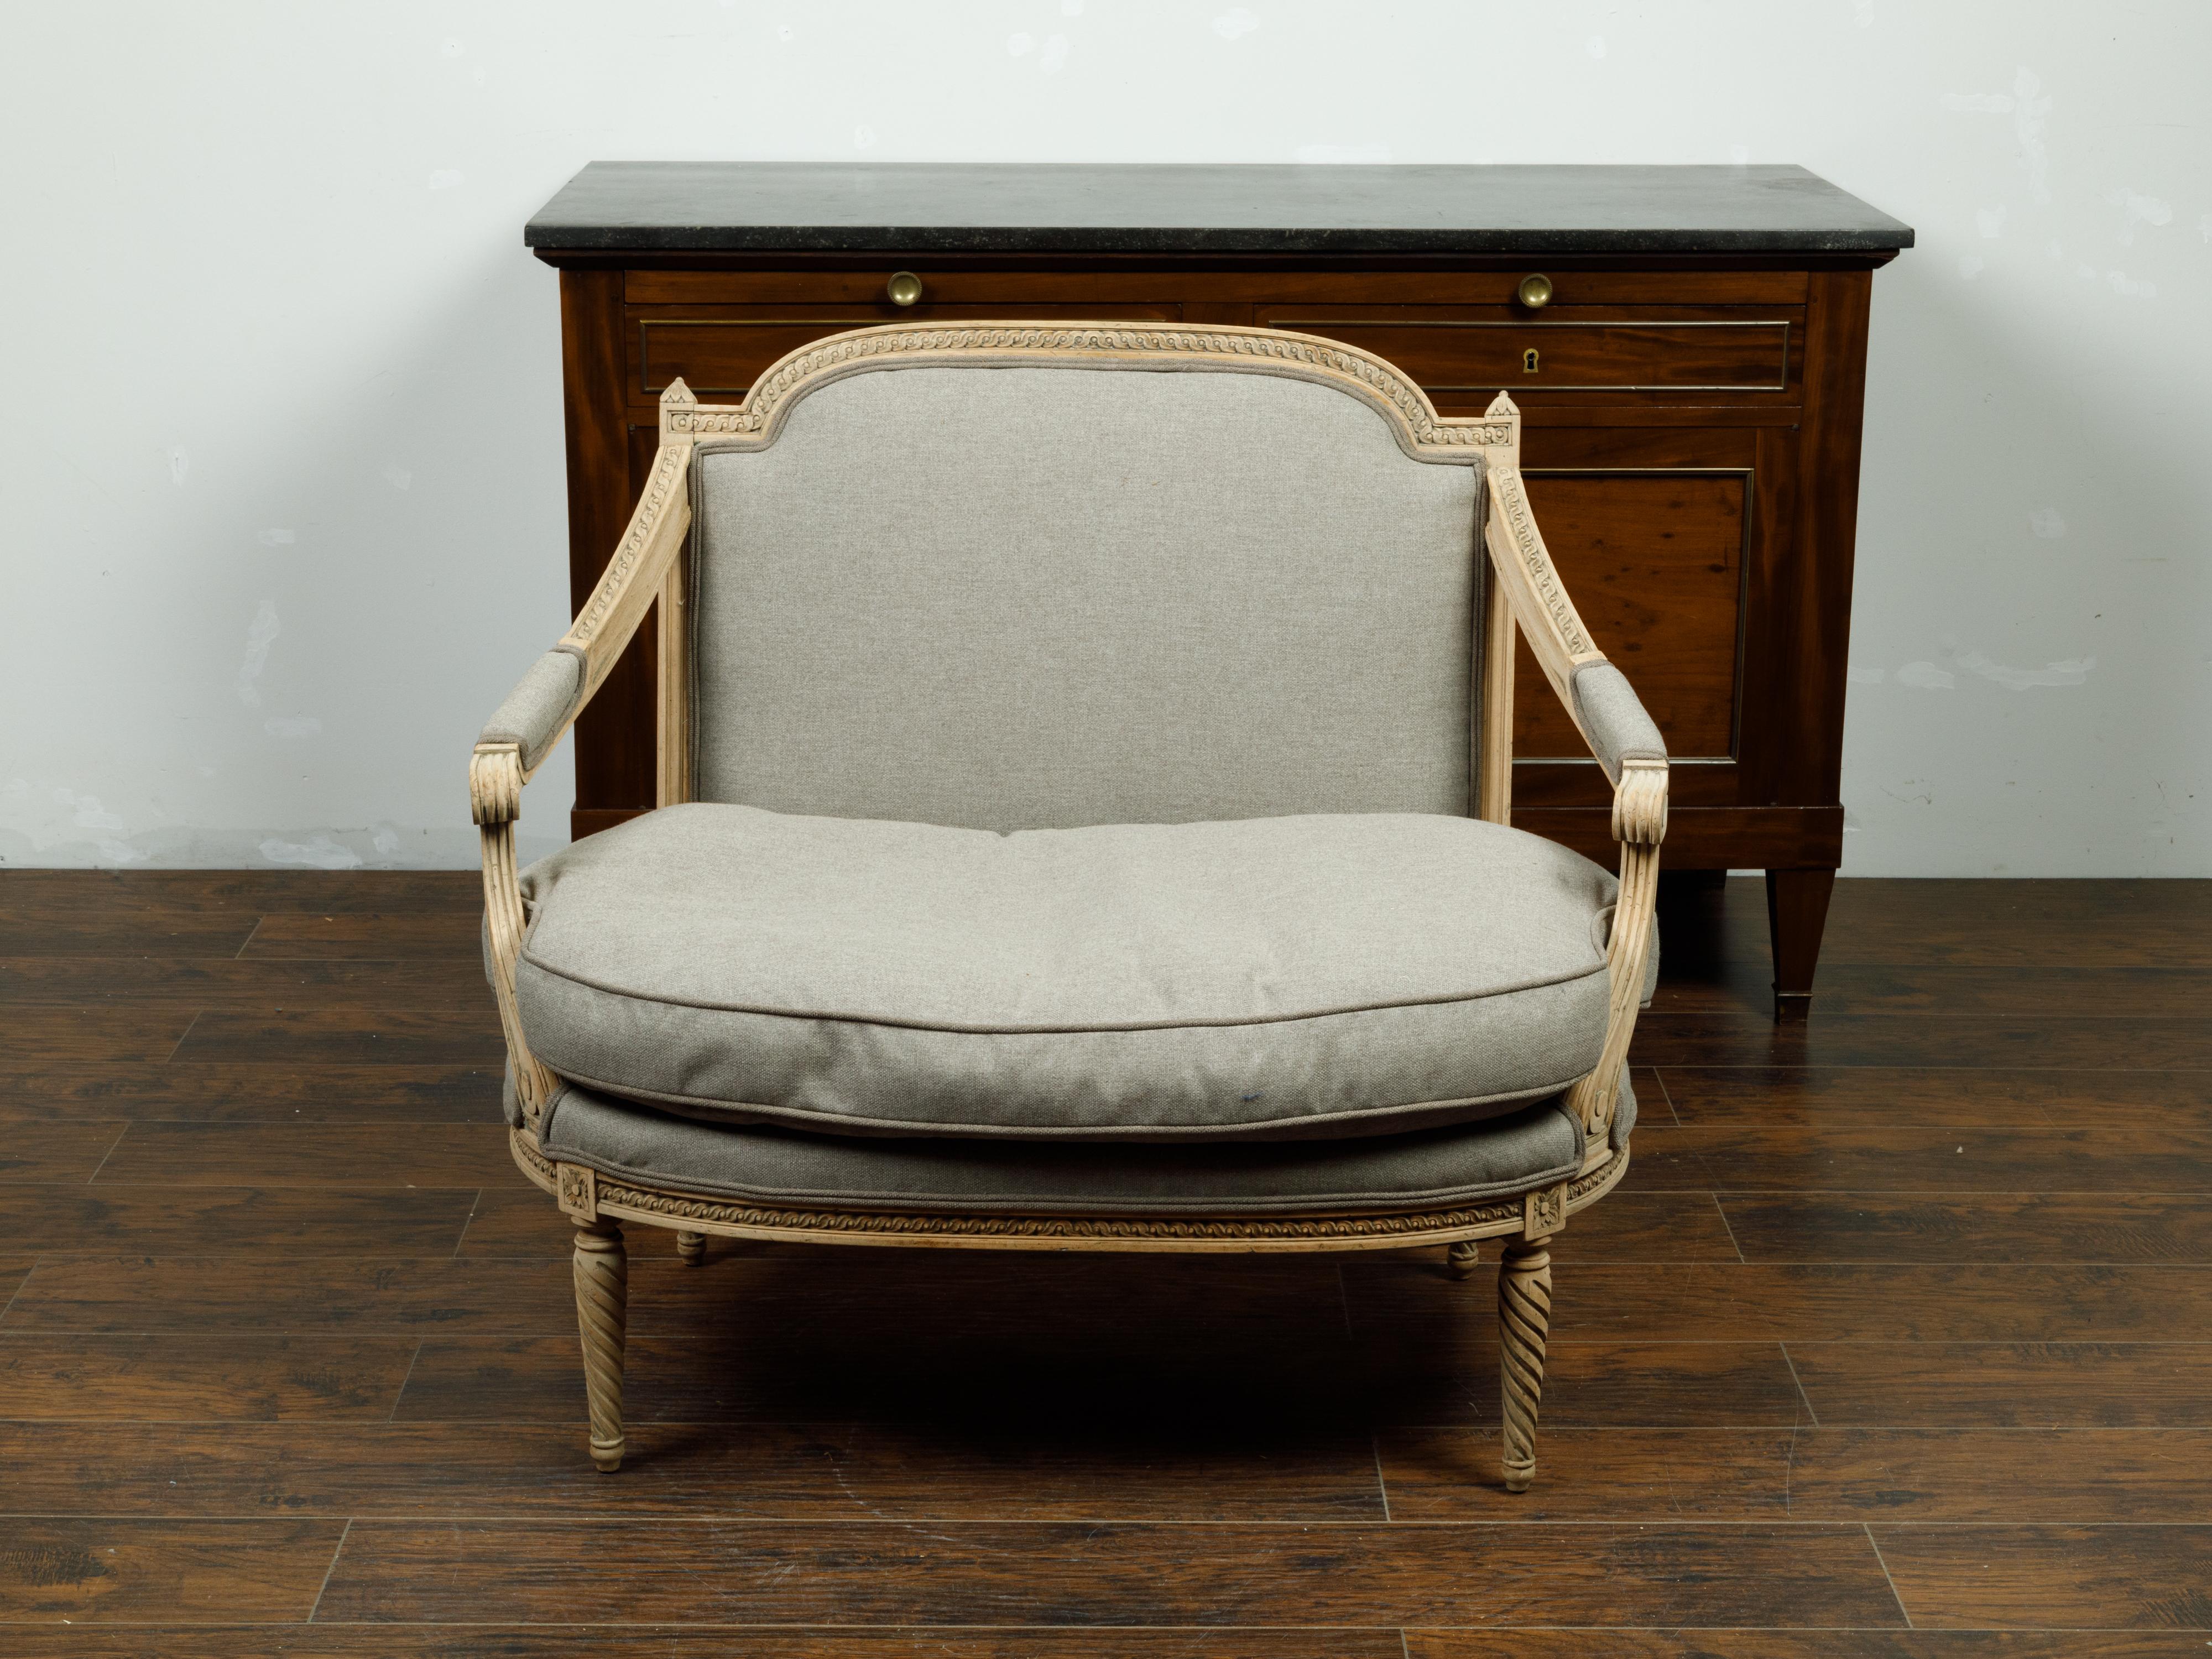 A French Louis XVI style bleached walnut marquise armchair from the 19th century, with carved guilloche frieze and new upholstery. Created in France during the 19th century, this walnut marquise (a wide bergère) features a large back carved with